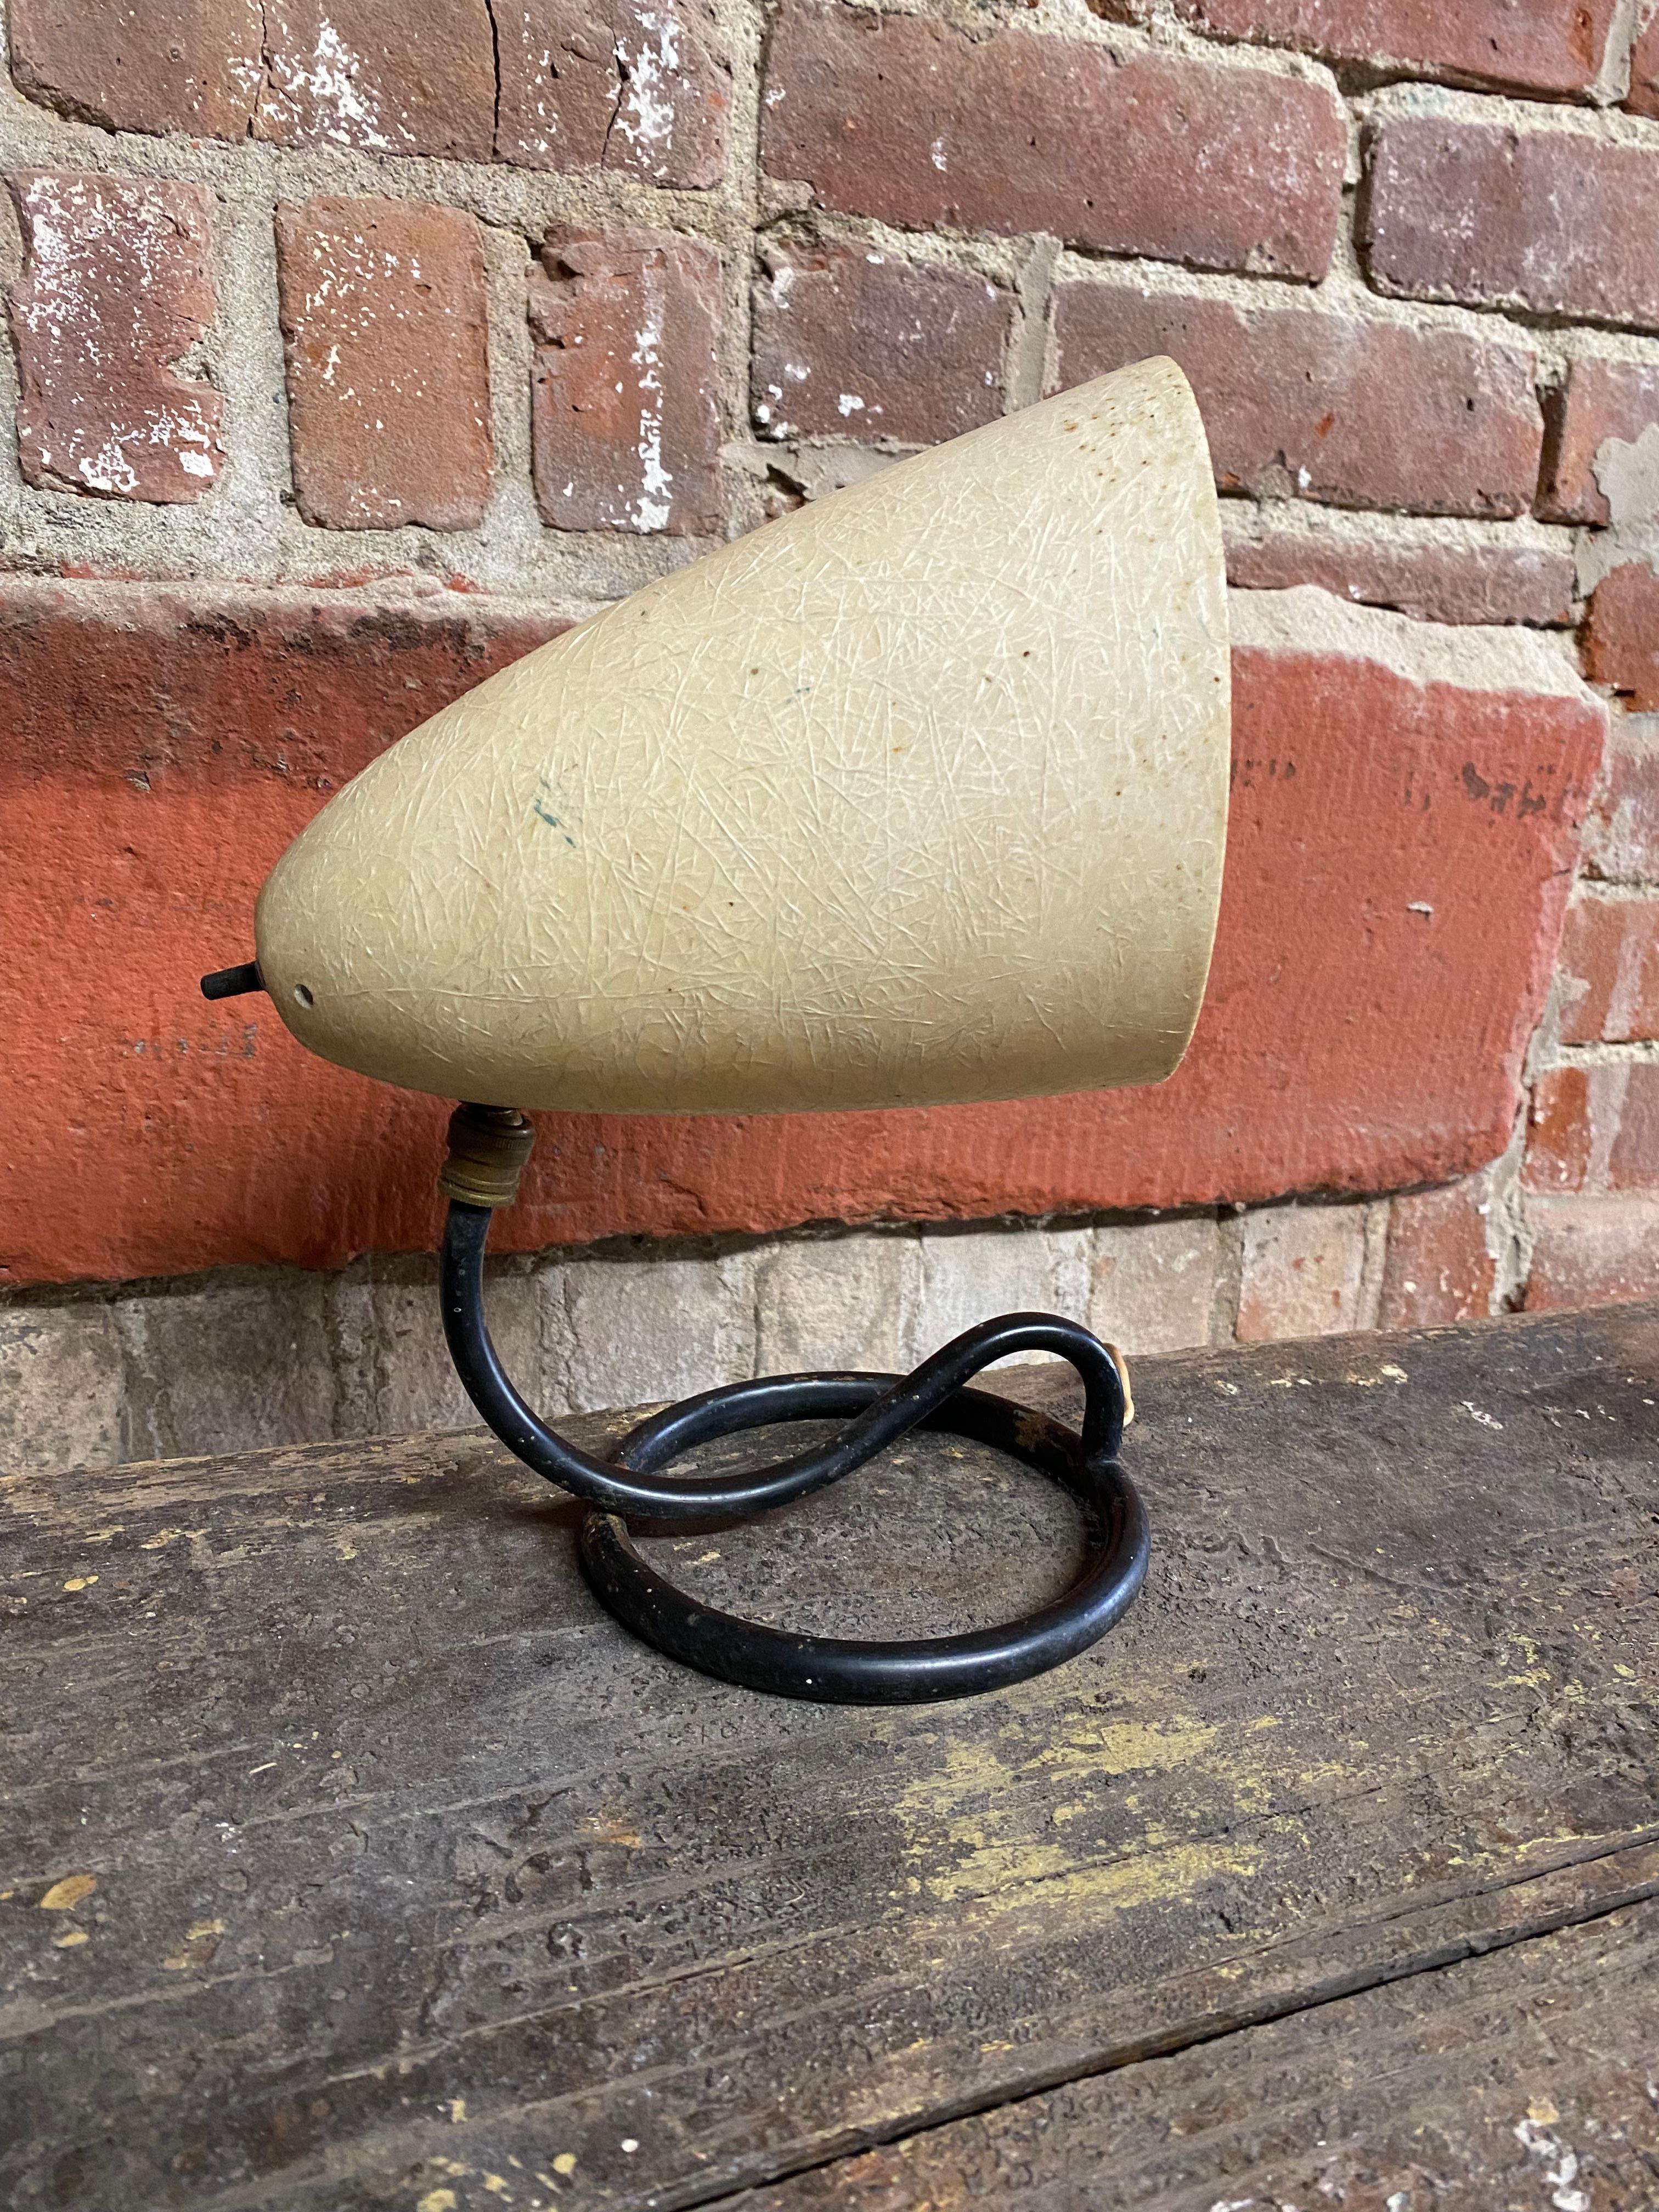 Parchment fiberglass cone with a black enamel coiled serpentine metal base lamp that can either be used as hanging wall sconce or shelf or table top spotlight type lamp. Circa 1950. Good overall condition with some minor surface wear to the metal